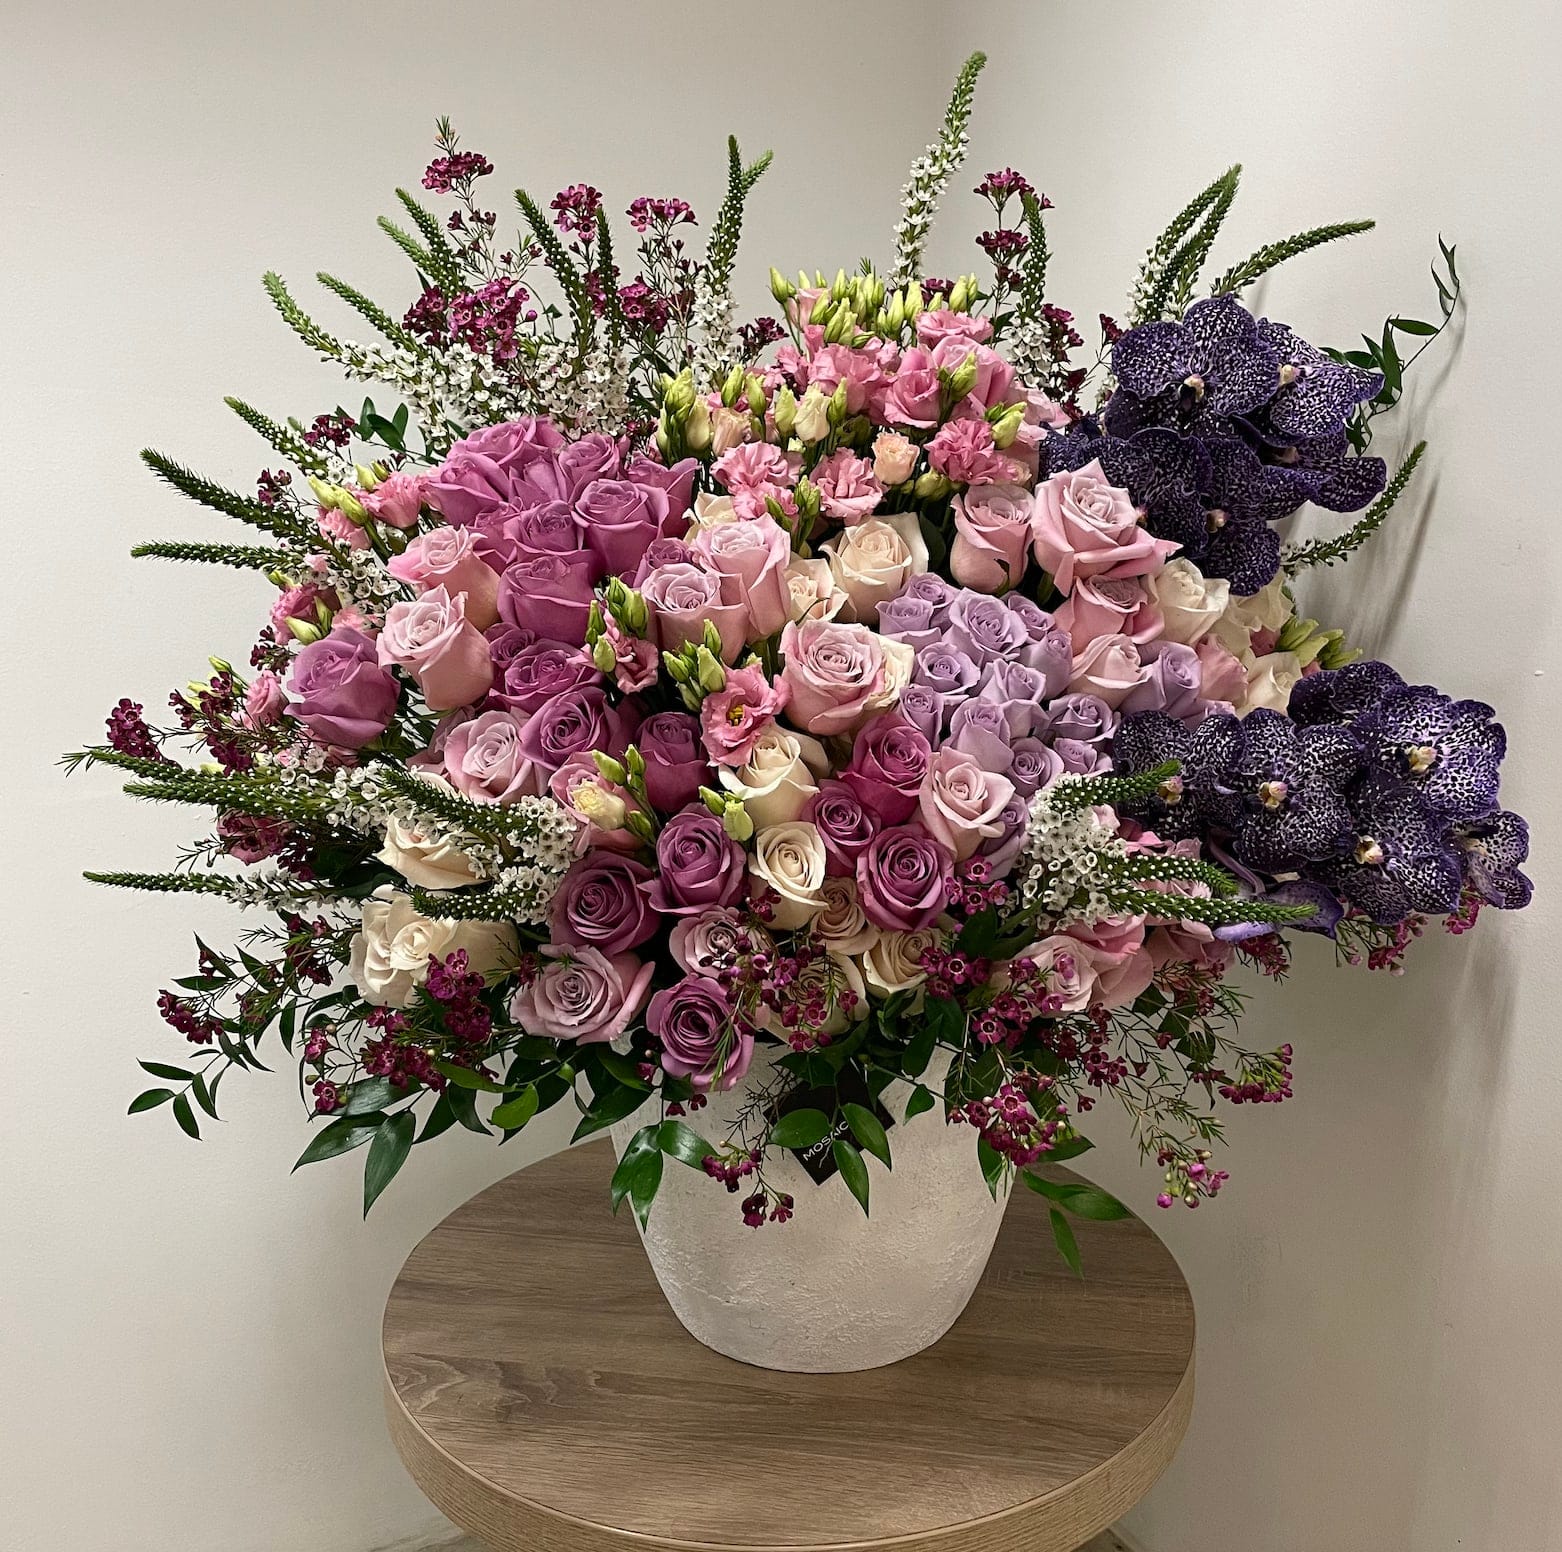 Bliss - A grand flower arrangement that brings joy for eyes and with scent. Contains an elegant mix of  roses, orchids, and other seasonal flowers and greens to create a vibrant mixture of bliss. Approximately 3 feet tall and 3 feet wide.